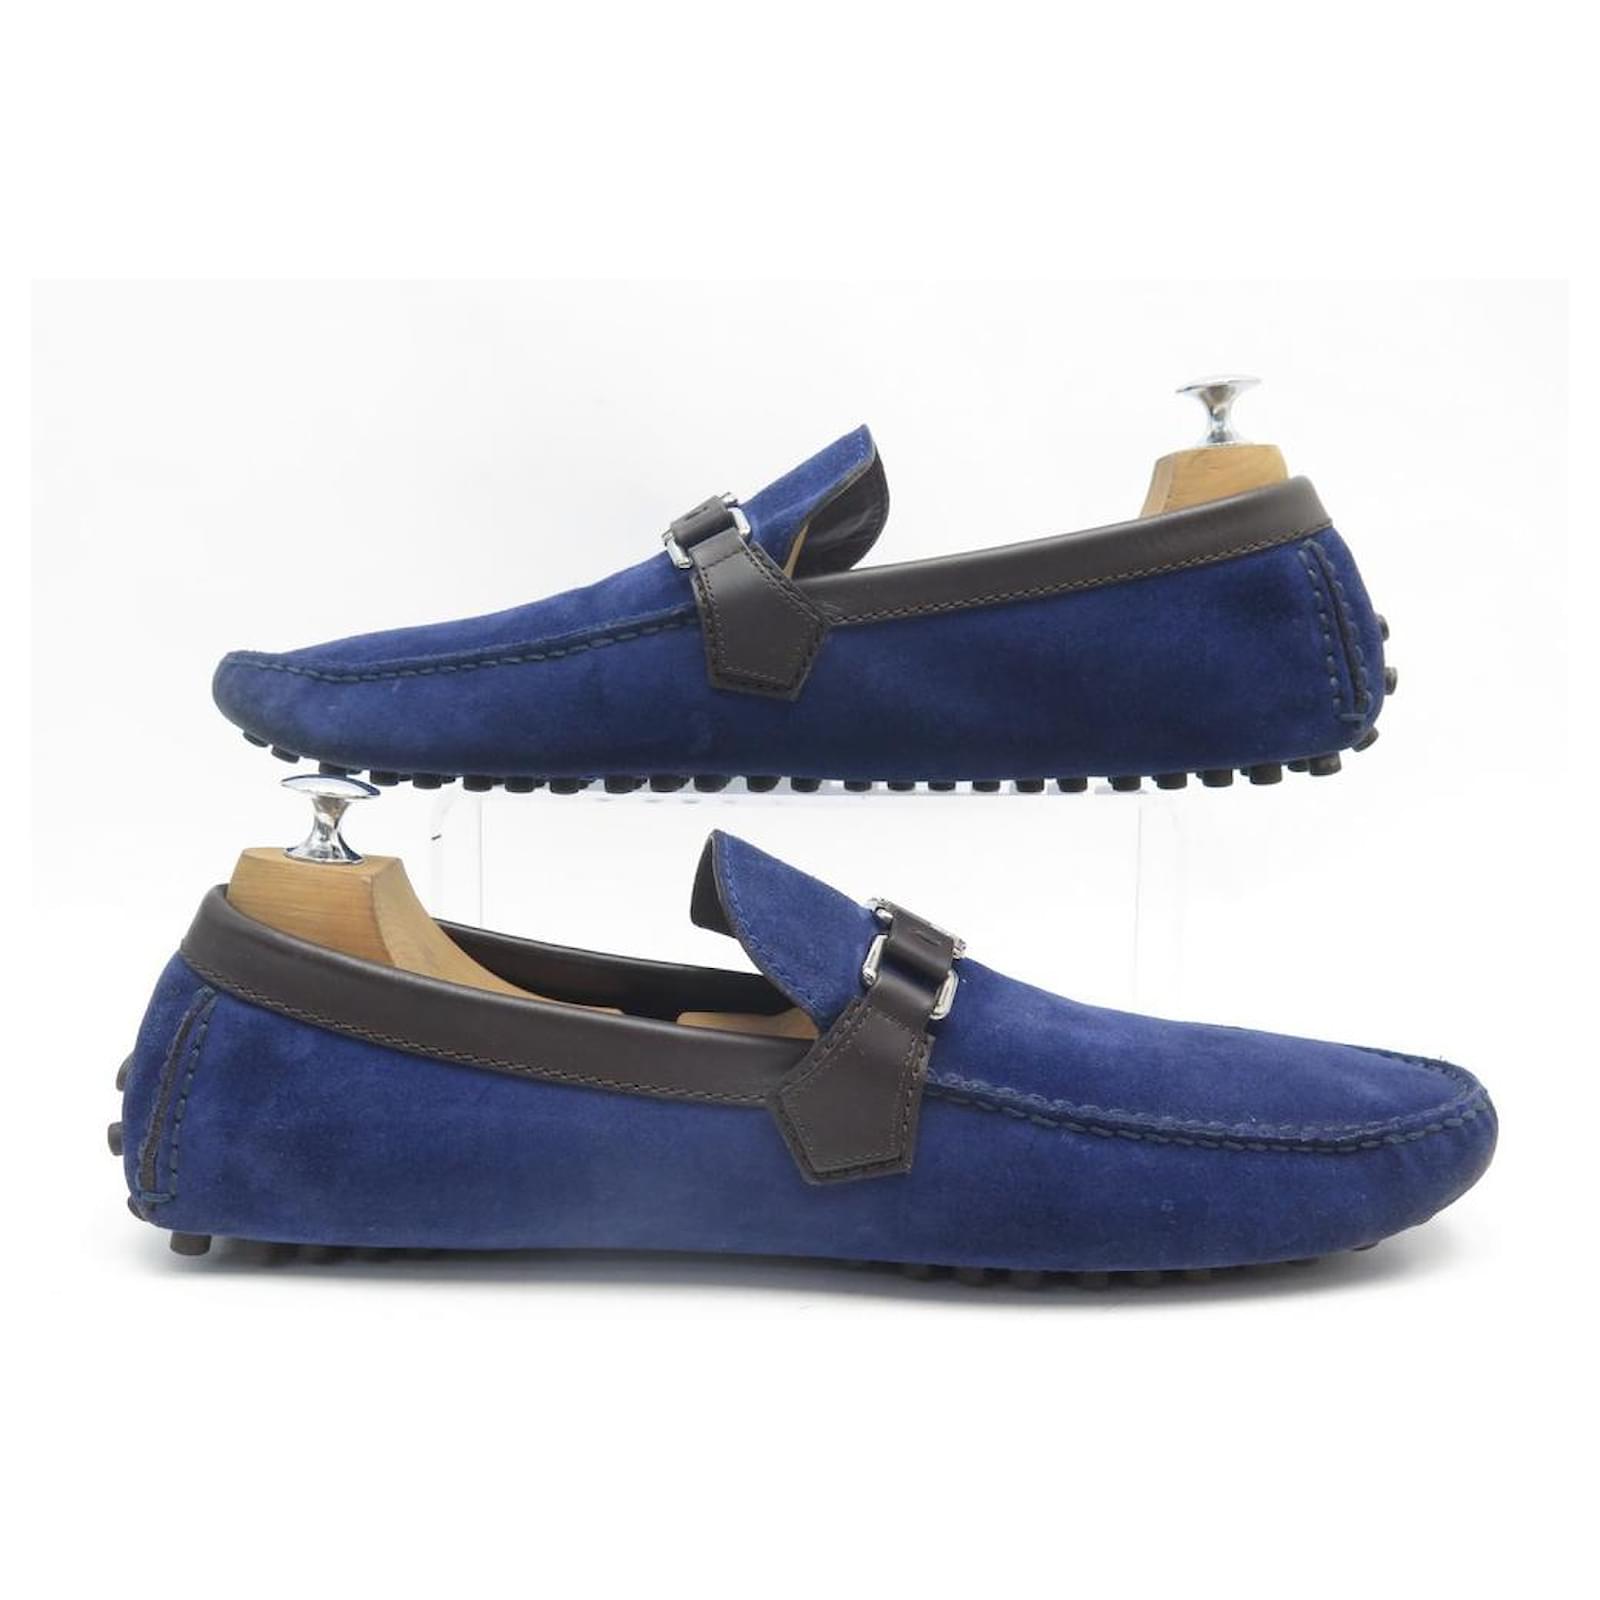 Louis Vuitton men Loafers in blue suede // Model: Hockenheim // Size: 10 //  New at 1stDibs